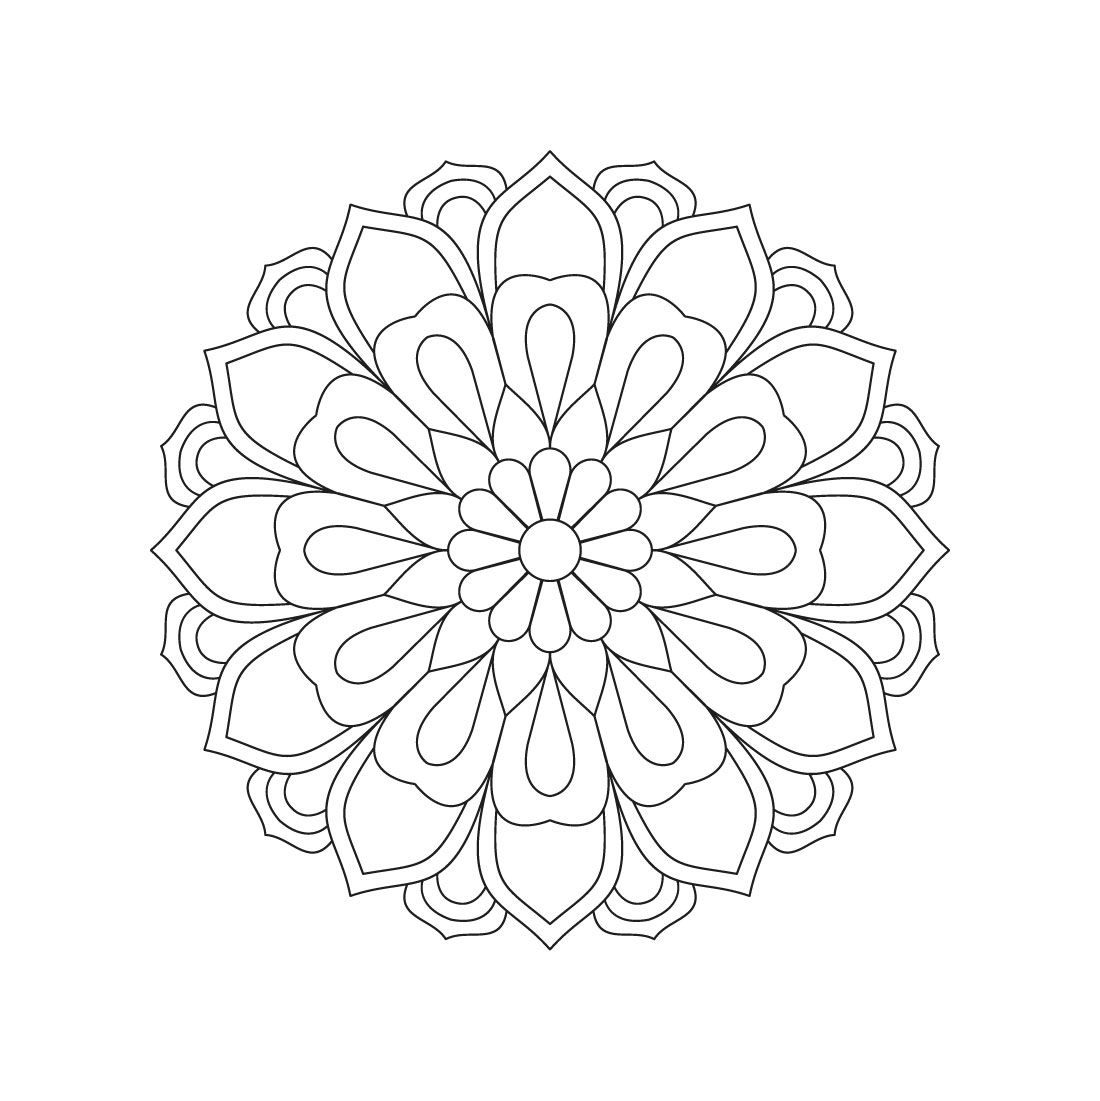 bundle of 10 blossoming beauty mandala coloring book pages 10 542